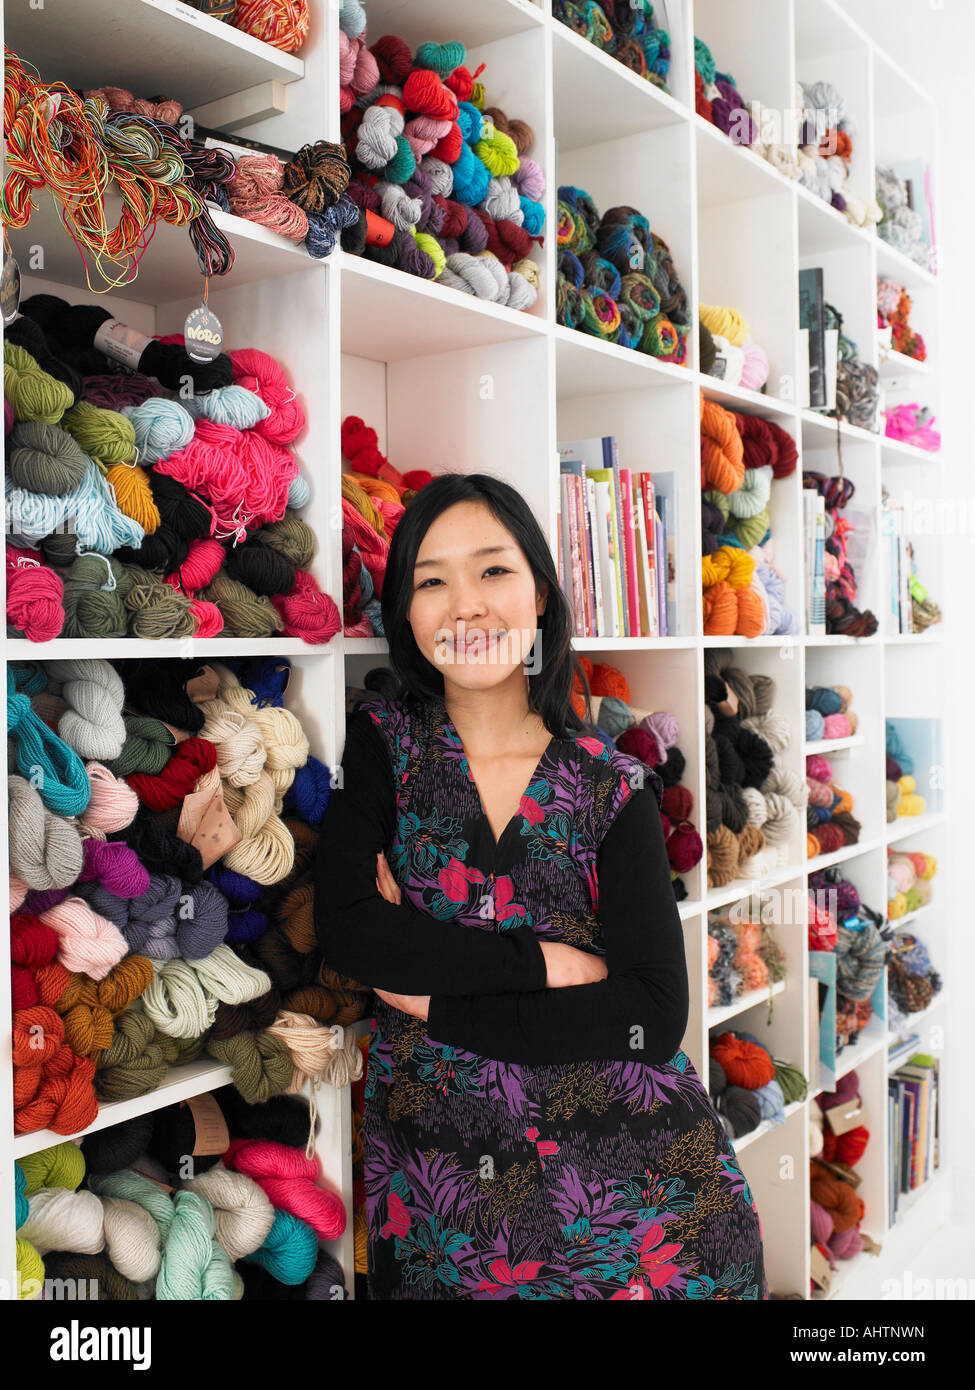 Young woman leaning on shelves of wool in craft shop, smiling Stock Photo